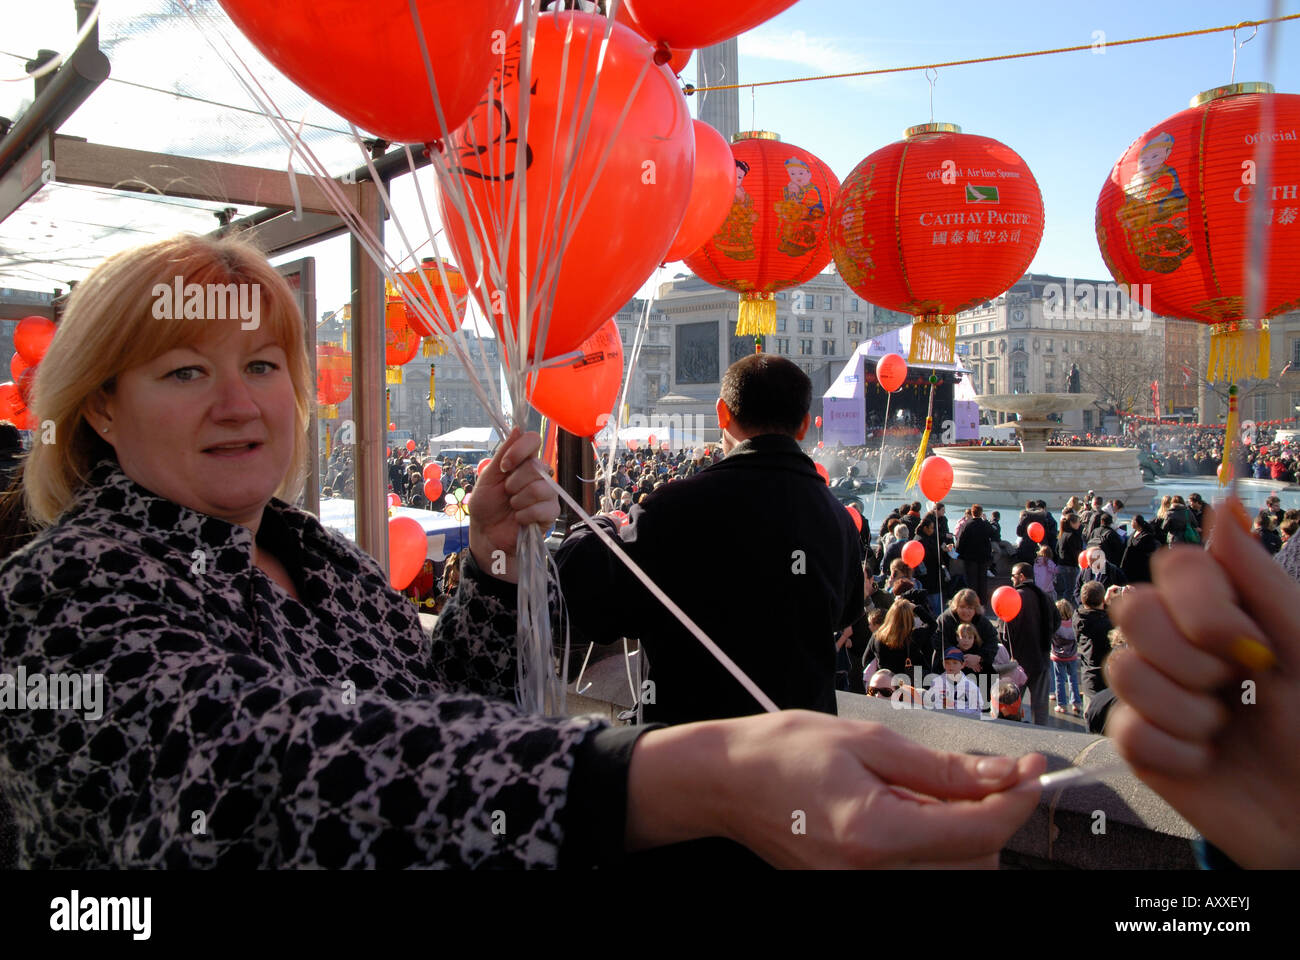 Giving out balloons at the Chinese New Year in Trafalgar Square Stock Photo